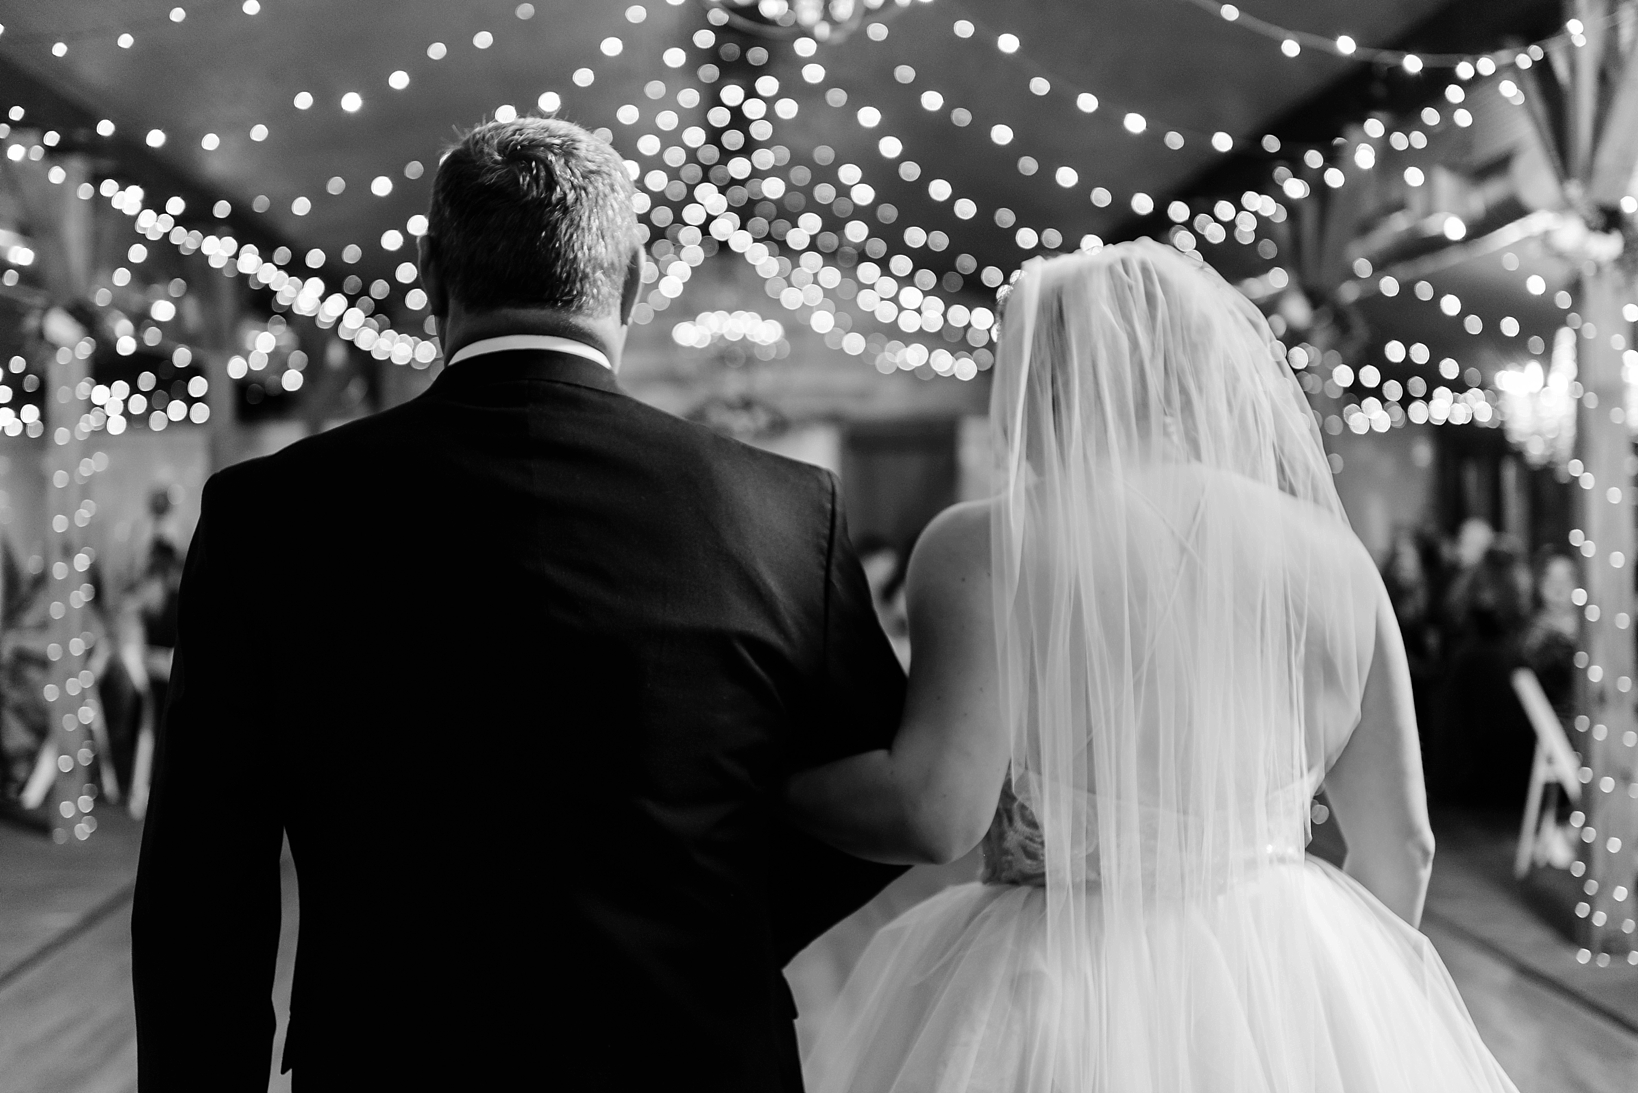 Father and Daughter dance during the reception surrounded by string lights everywhere